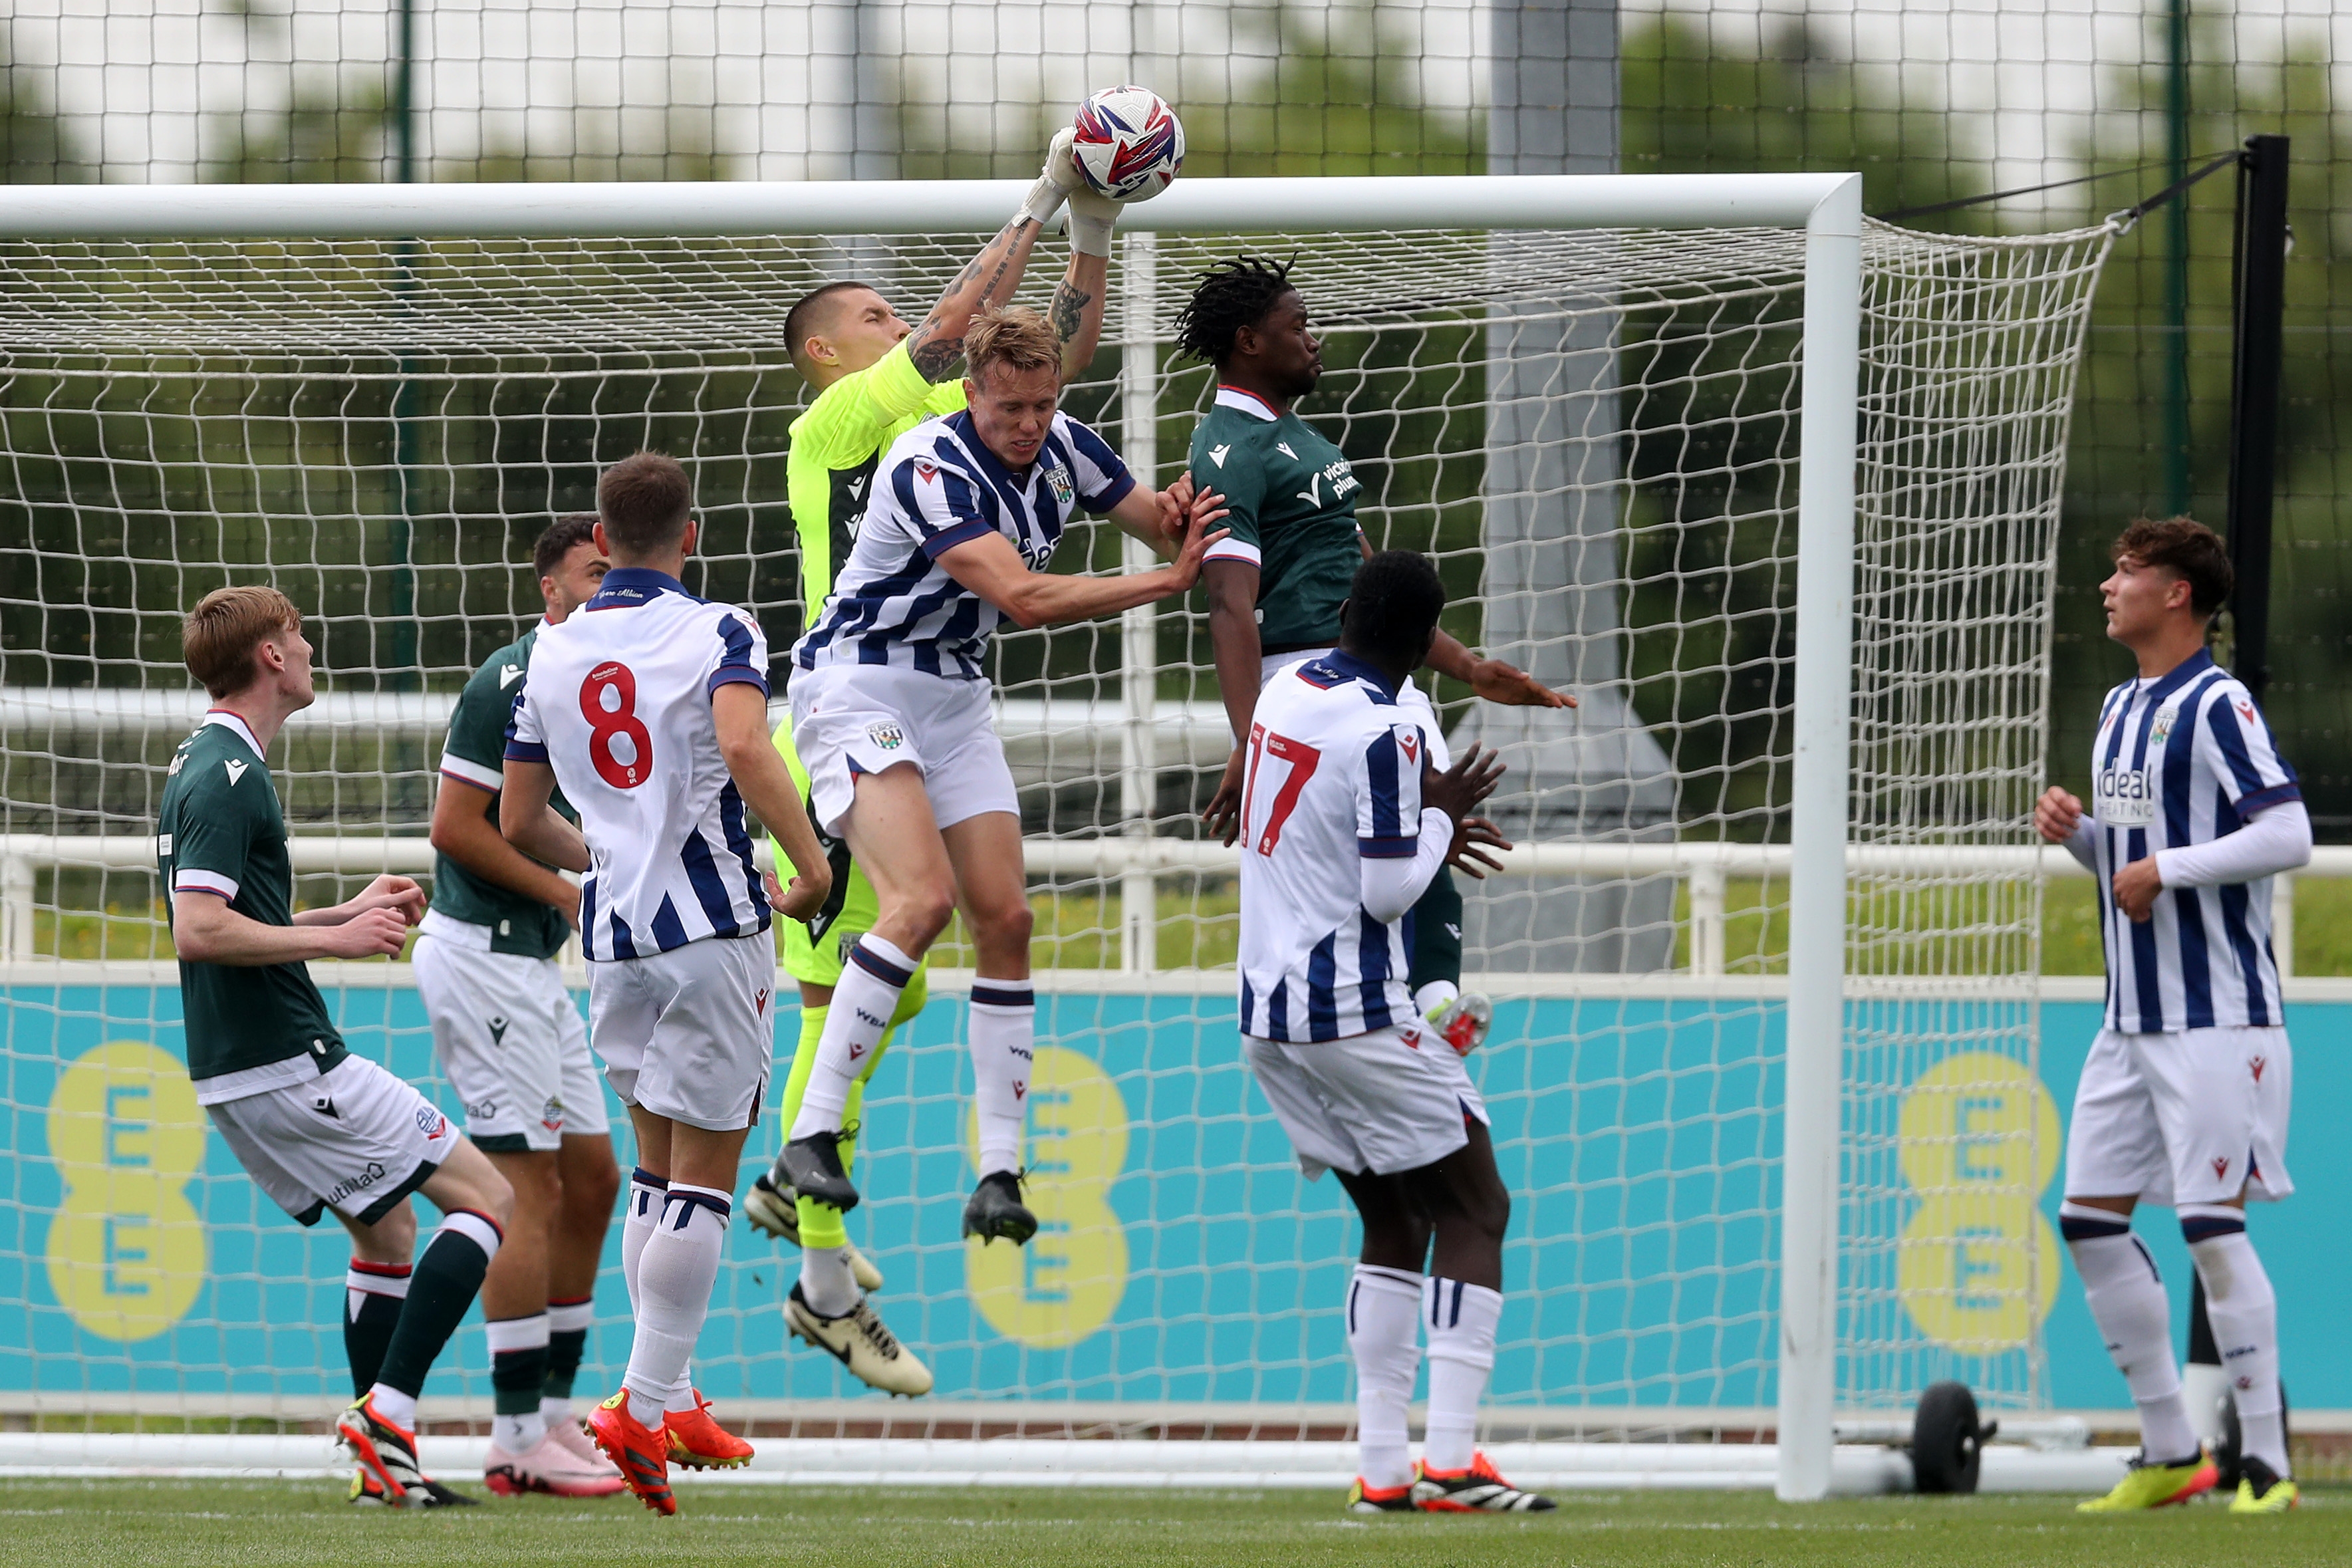 Several players and Albion keeper Ted Cann jump to try and connect with the ball against Bolton 